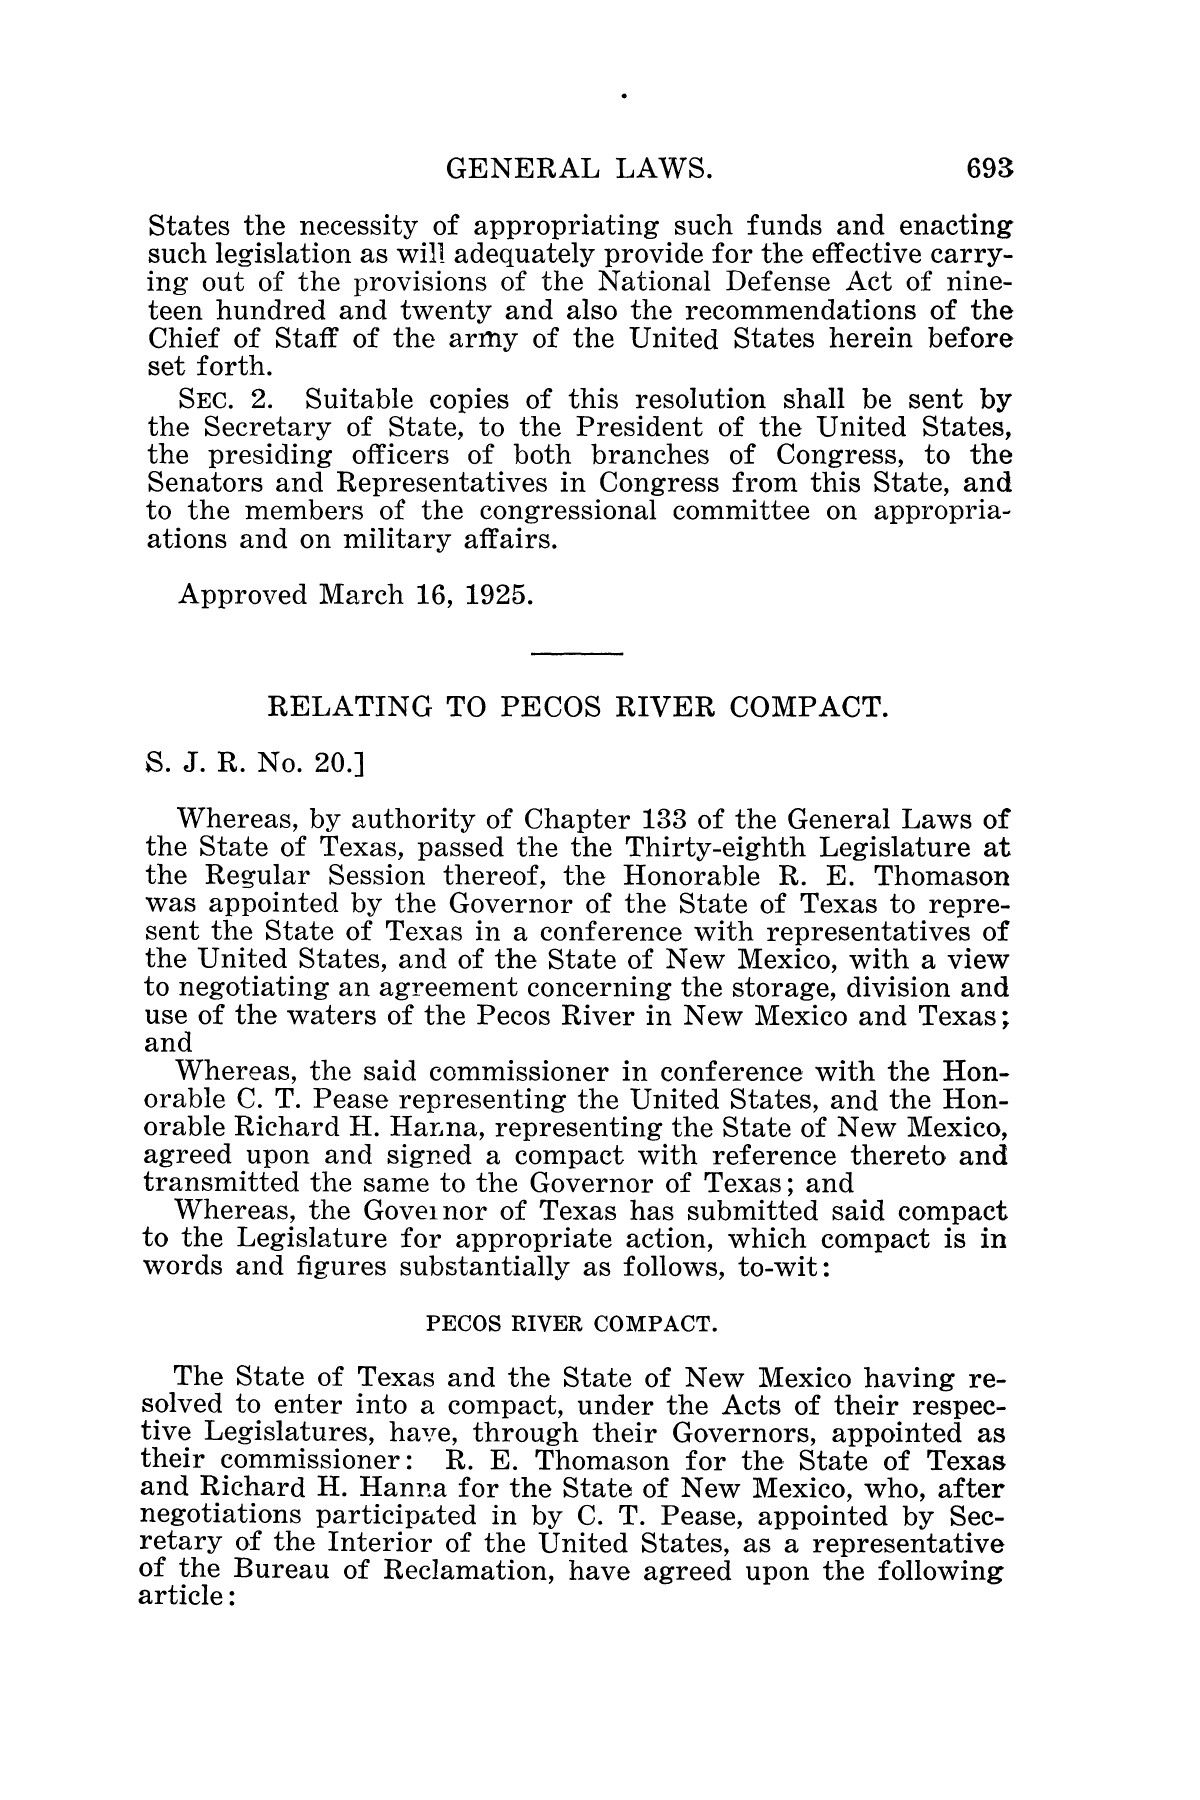 The Laws of Texas, 1923-1925 [Volume 22]
                                                
                                                    [Sequence #]: 1621 of 1648
                                                